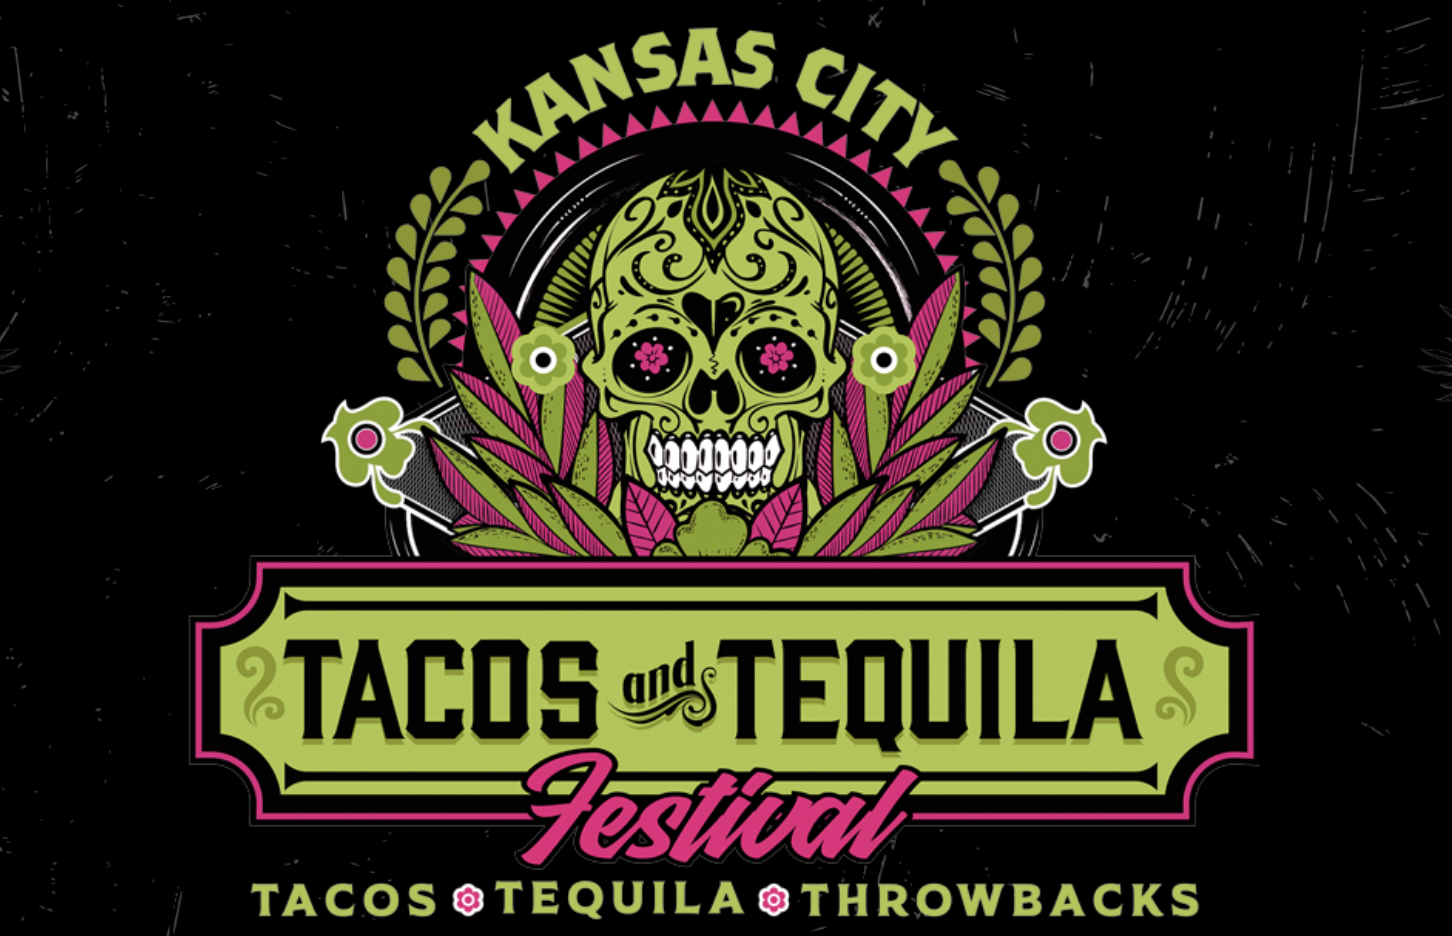 Tacos and Tequila Festival announces performers for June '22 event